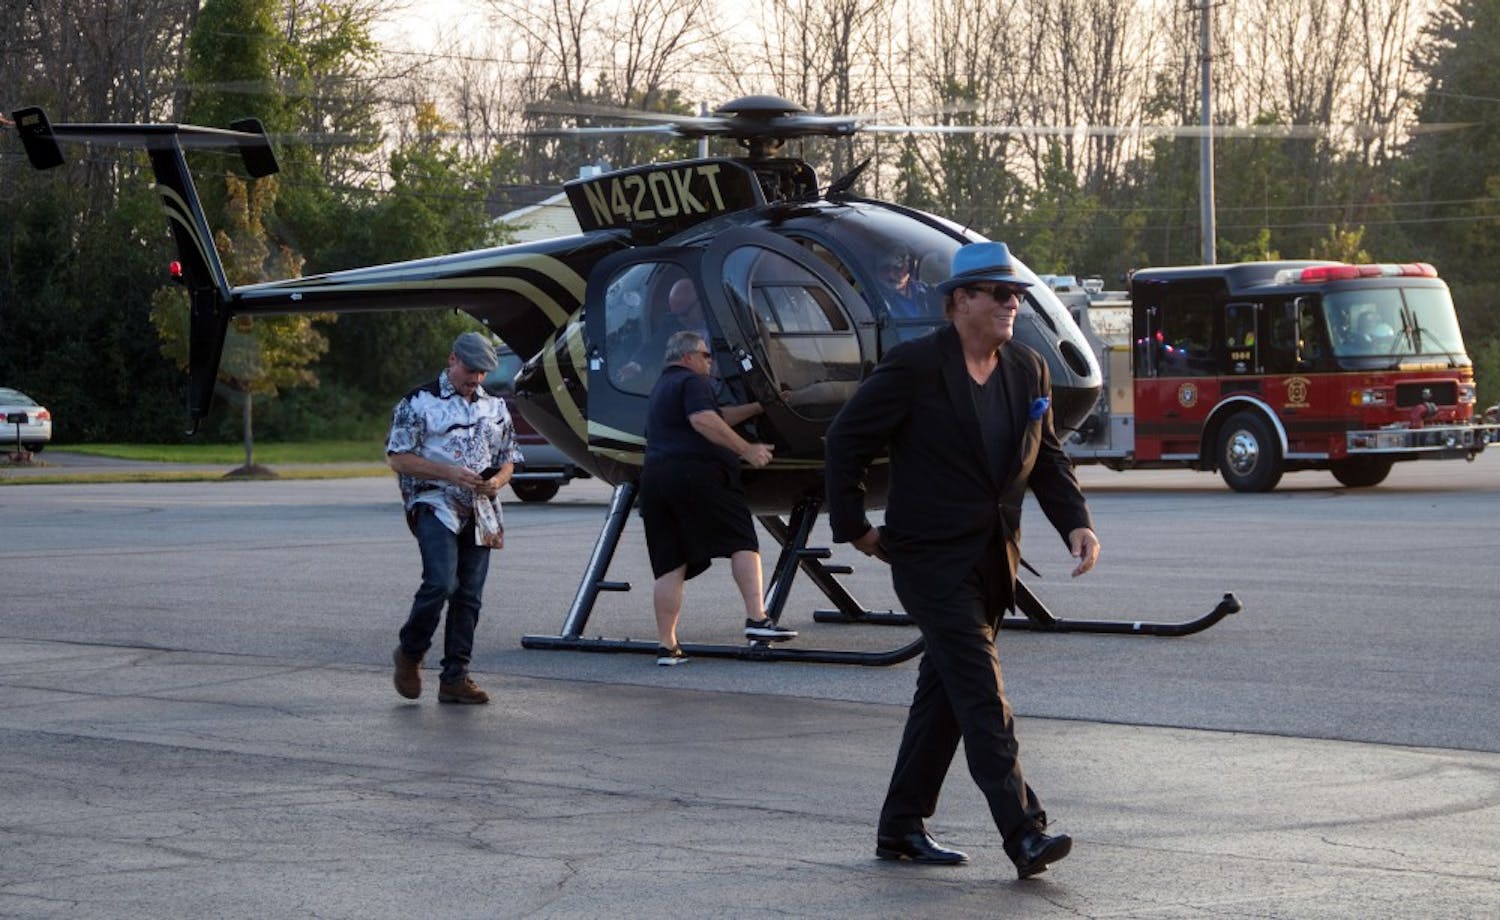 Bond villain Robert Davi kicked off the Buffalo Niagara Film Festival with an arrival on a helicopter before screening his documentary, "Davi's way for the crowd."&nbsp;